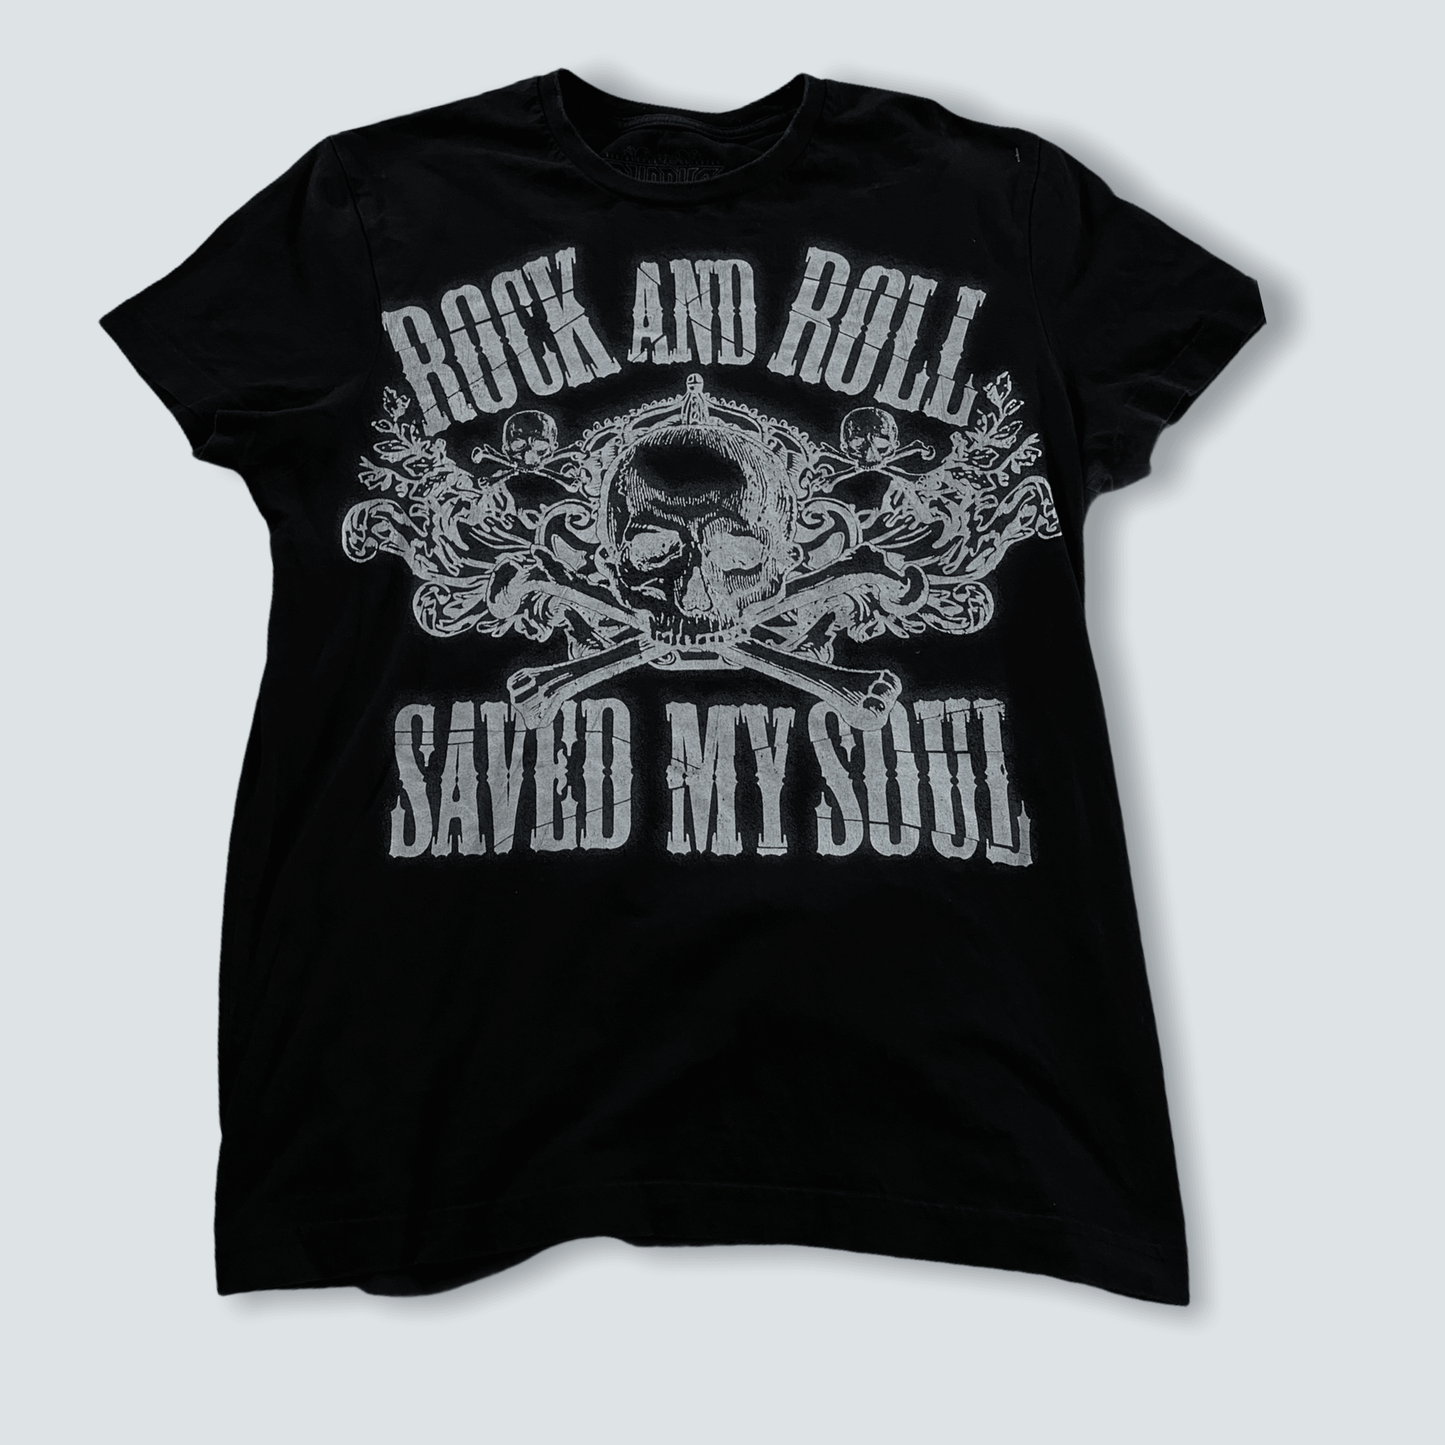 Rock and roll save my soul band tee (M) - Known Source